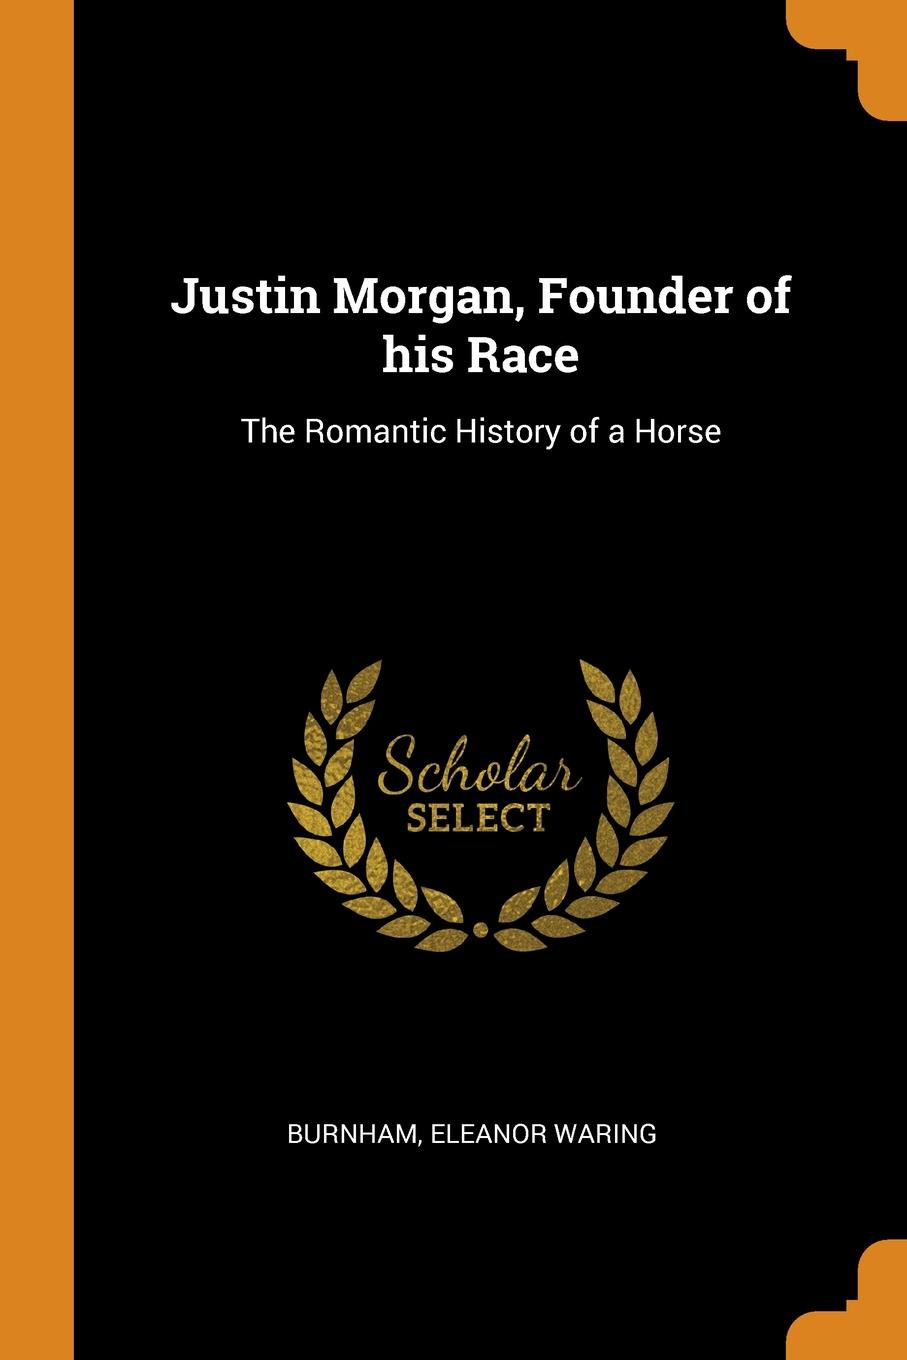 Justin Morgan, Founder of his Race. The Romantic History of a Horse